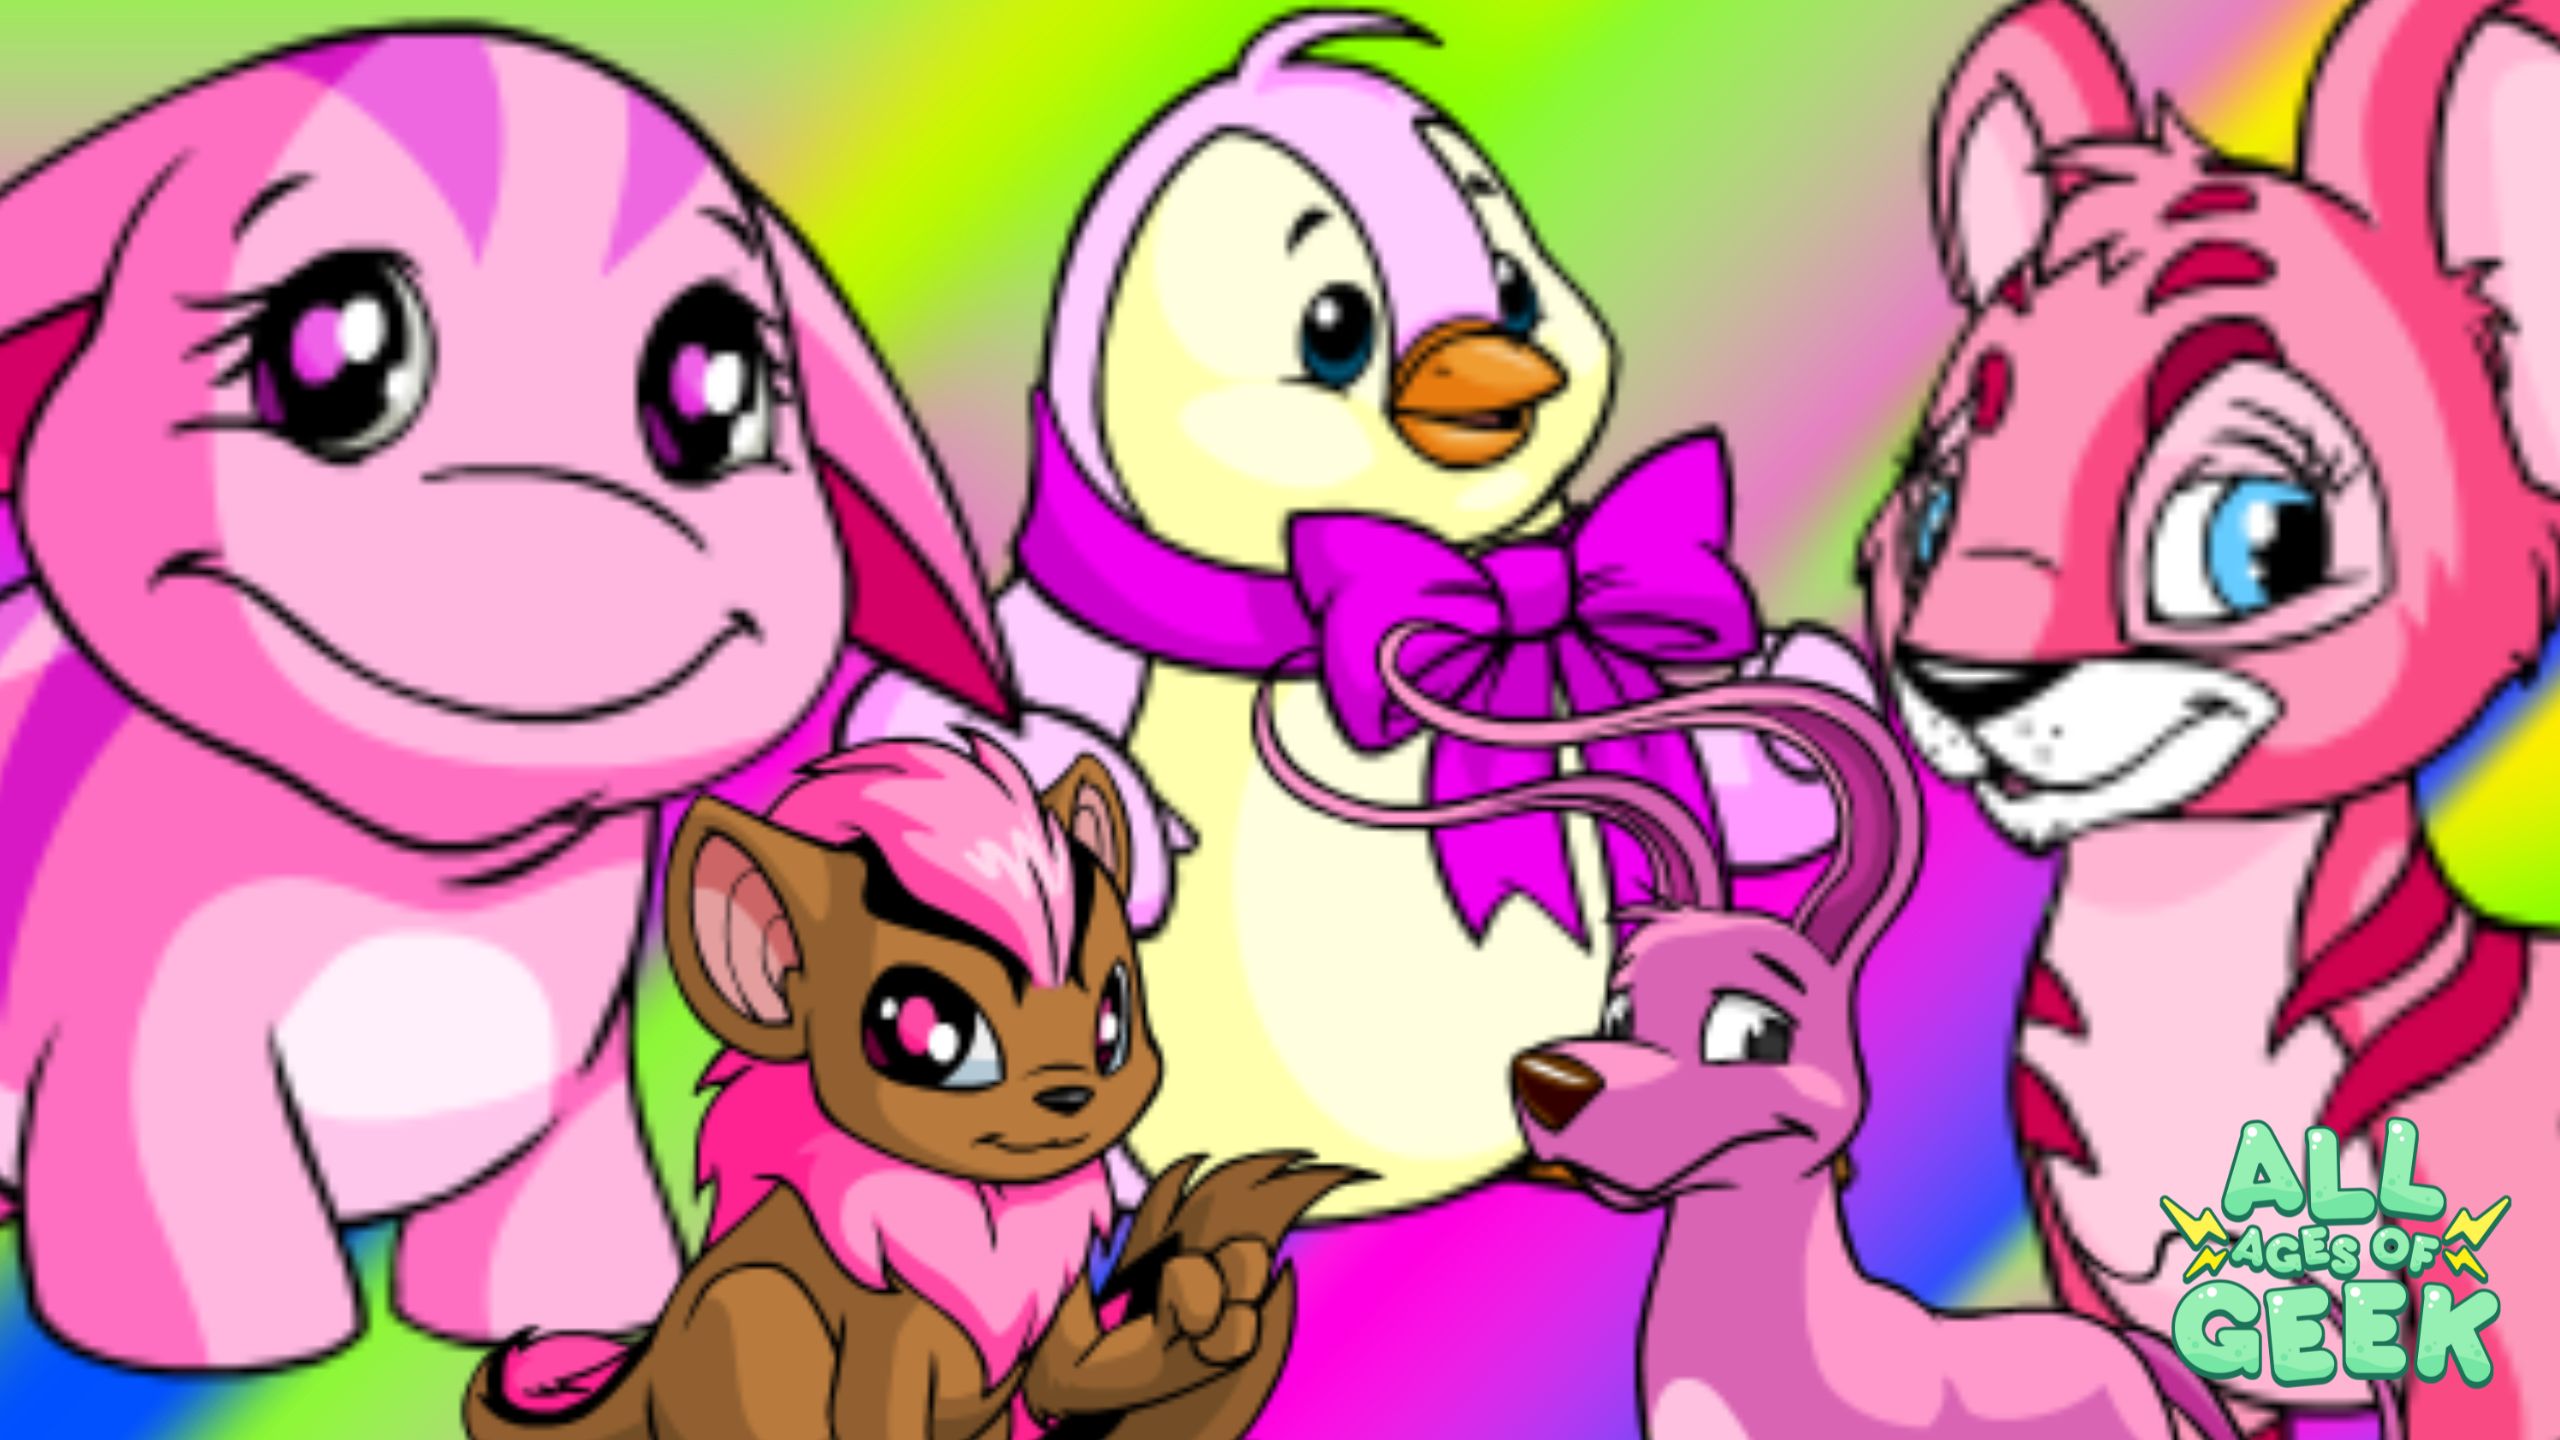 This image is a vibrant collage featuring five colorful, cartoonish creatures on a bright gradient background. 1. **Top Left**: A small, pink creature with darker pink stripes and large, friendly eyes. 2. **Top Center**: A cheerful penguin-like creature with a yellow belly, light pink feathers, an orange beak and feet, and a bright pink bow. 3. **Top Right**: A tiger-like creature with light pink fur, darker pink stripes, and blue eyes. 4. **Bottom Left**: A lion-like creature with light brown fur, a tuft of bright pink hair, large red eyes, and a bushy tail. 5. **Bottom Right**: A slender, four-legged creature with light pink fur and long, floppy ears. The "All Ages of Geek" logo is in the bottom right corner.